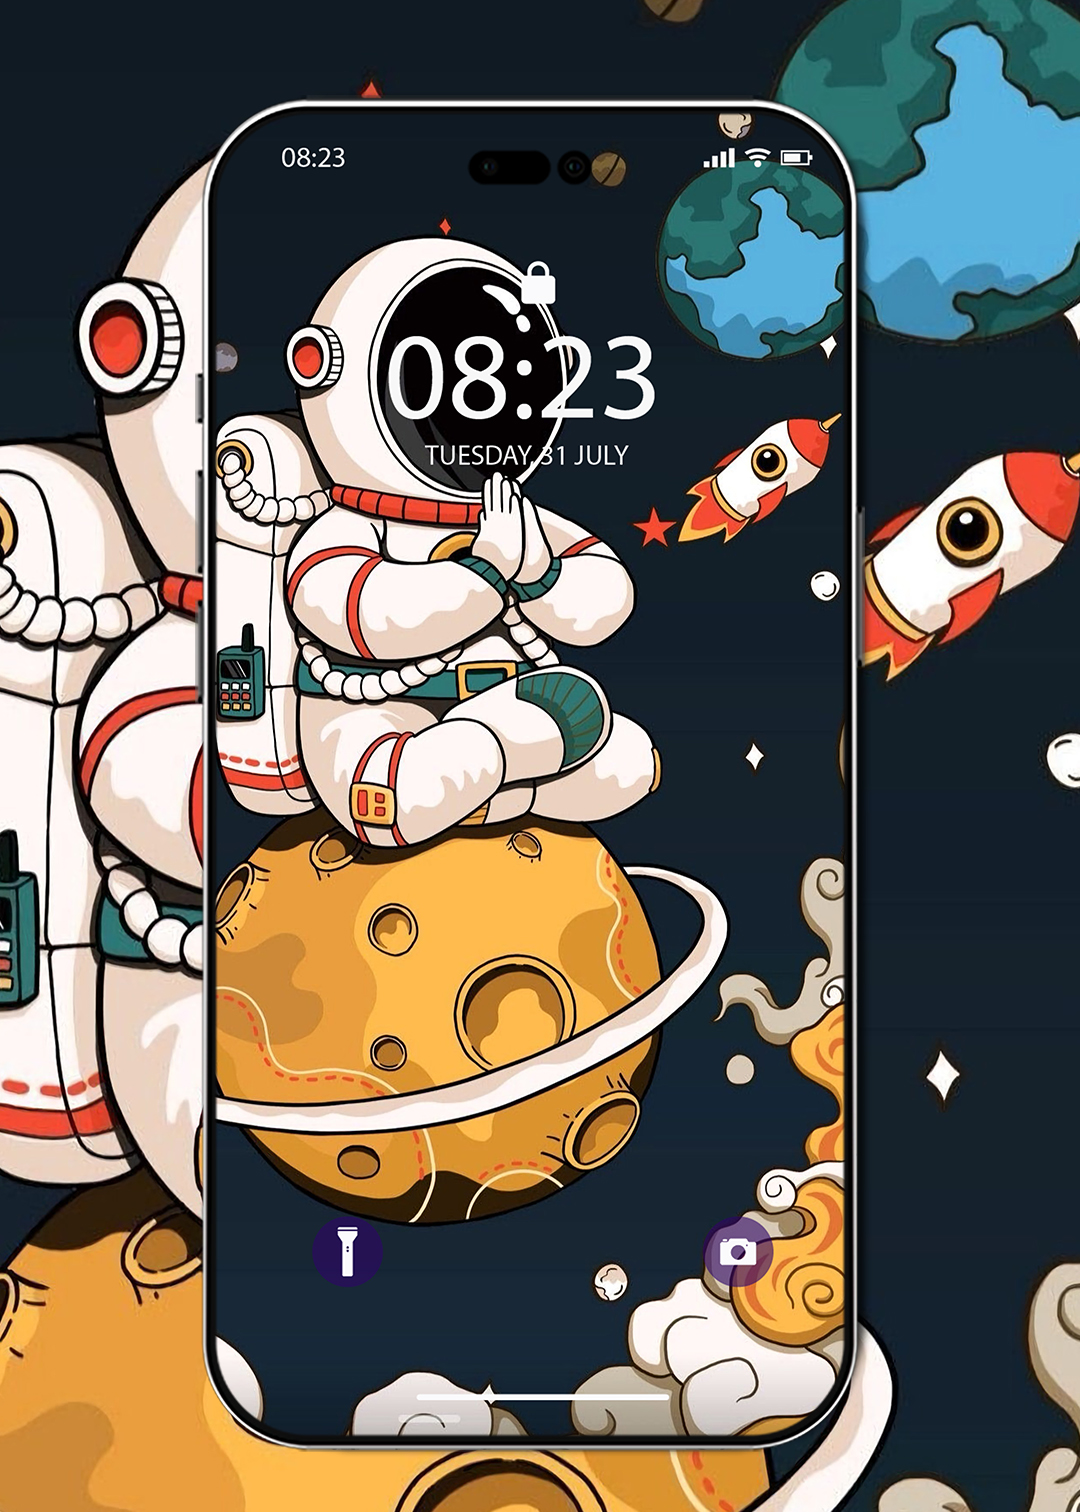 zen astronaut wallpaper for ios iphone and android mobile